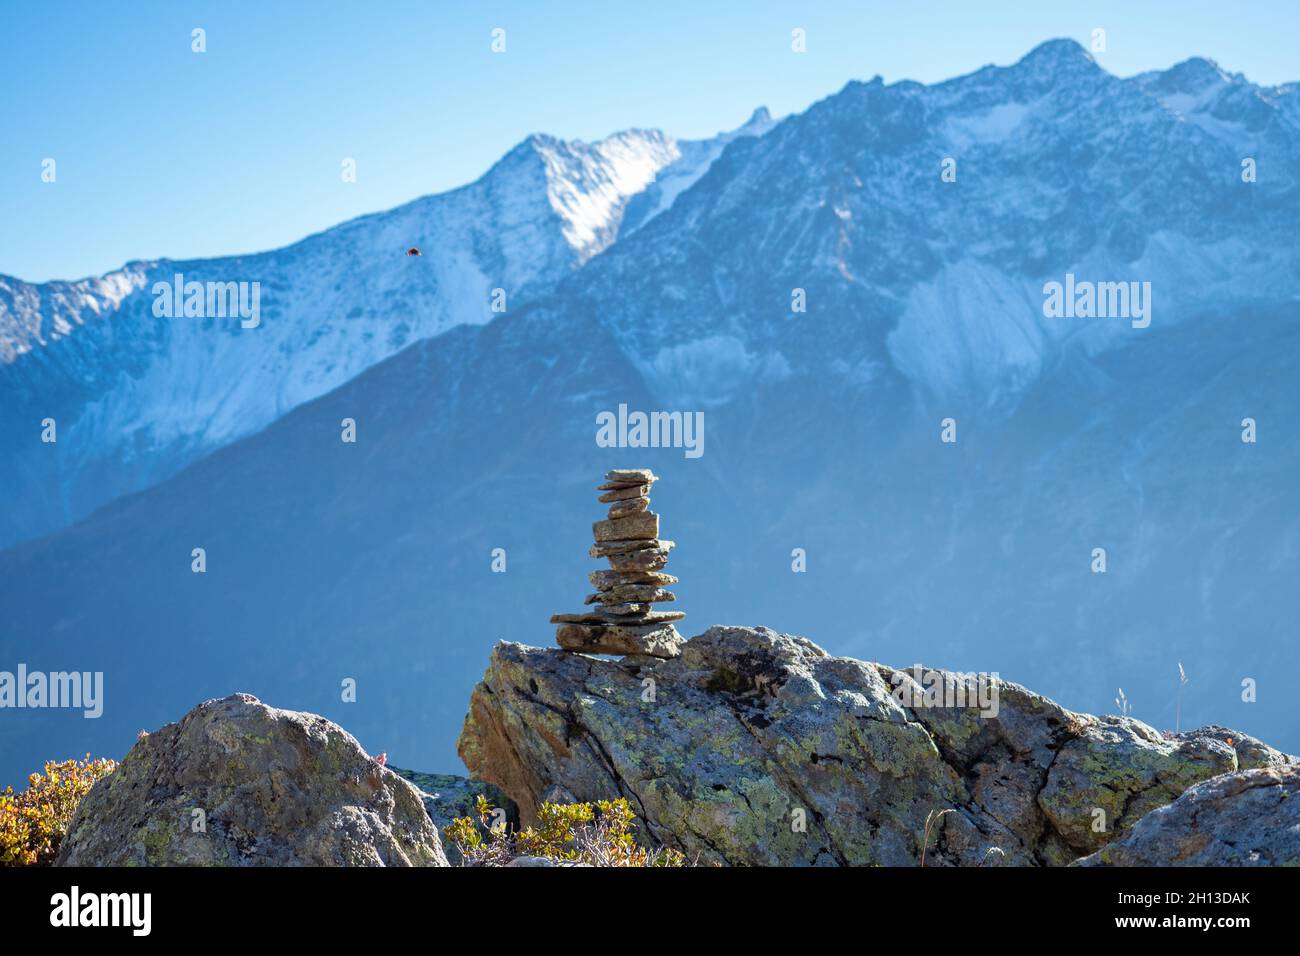 Hiking in Central Switzerland. A cairn marking a footpath, high mountains in the background Stock Photo